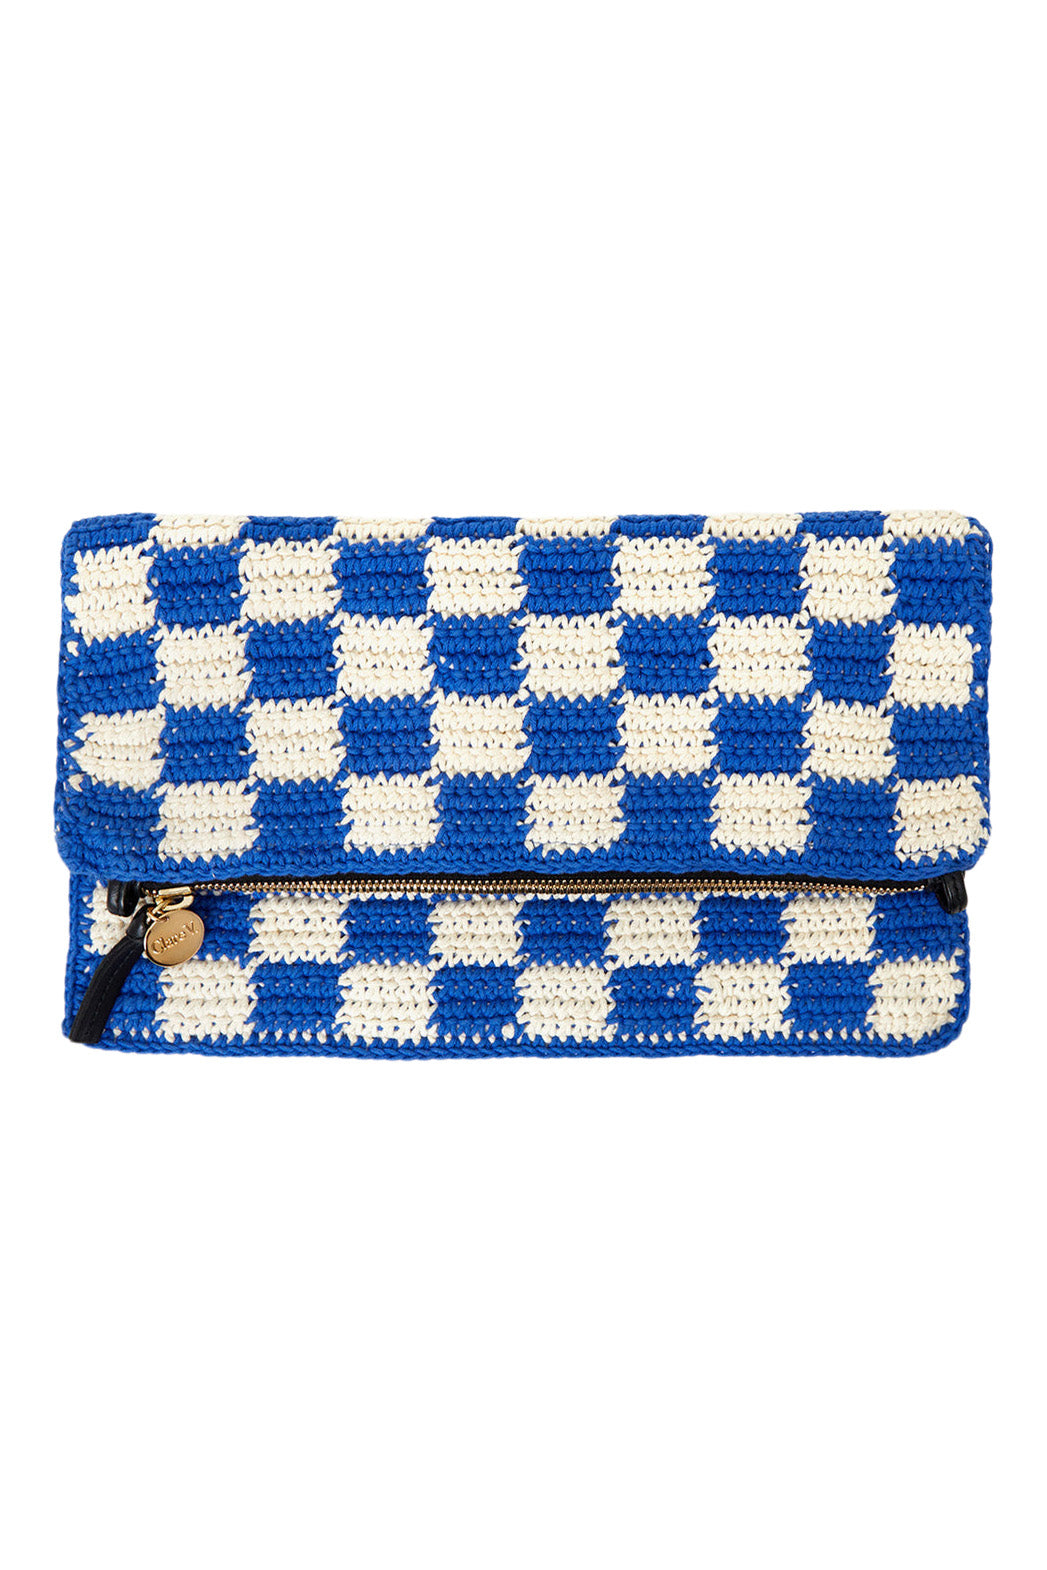 Clare V. Foldover Clutch with Tabs in Cobalt & Cream Crochet Checker